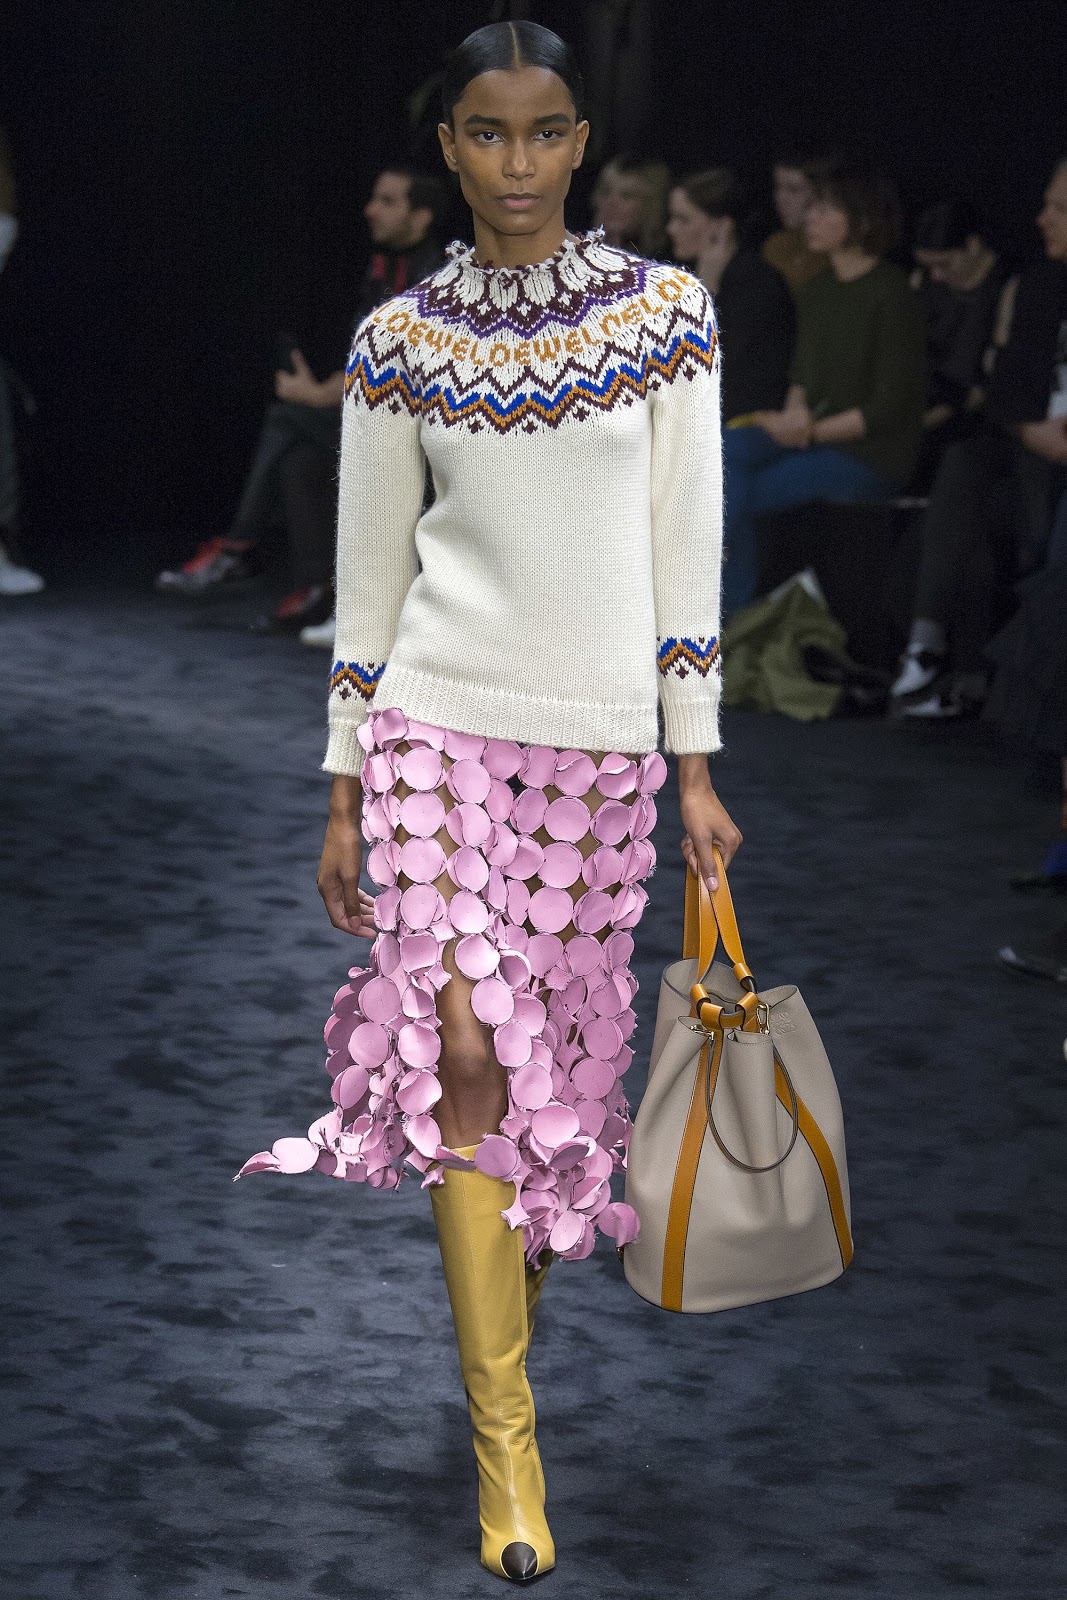 Fashion inspiration : The knitwear from Loewe's AW17 Collection. | Cool ...